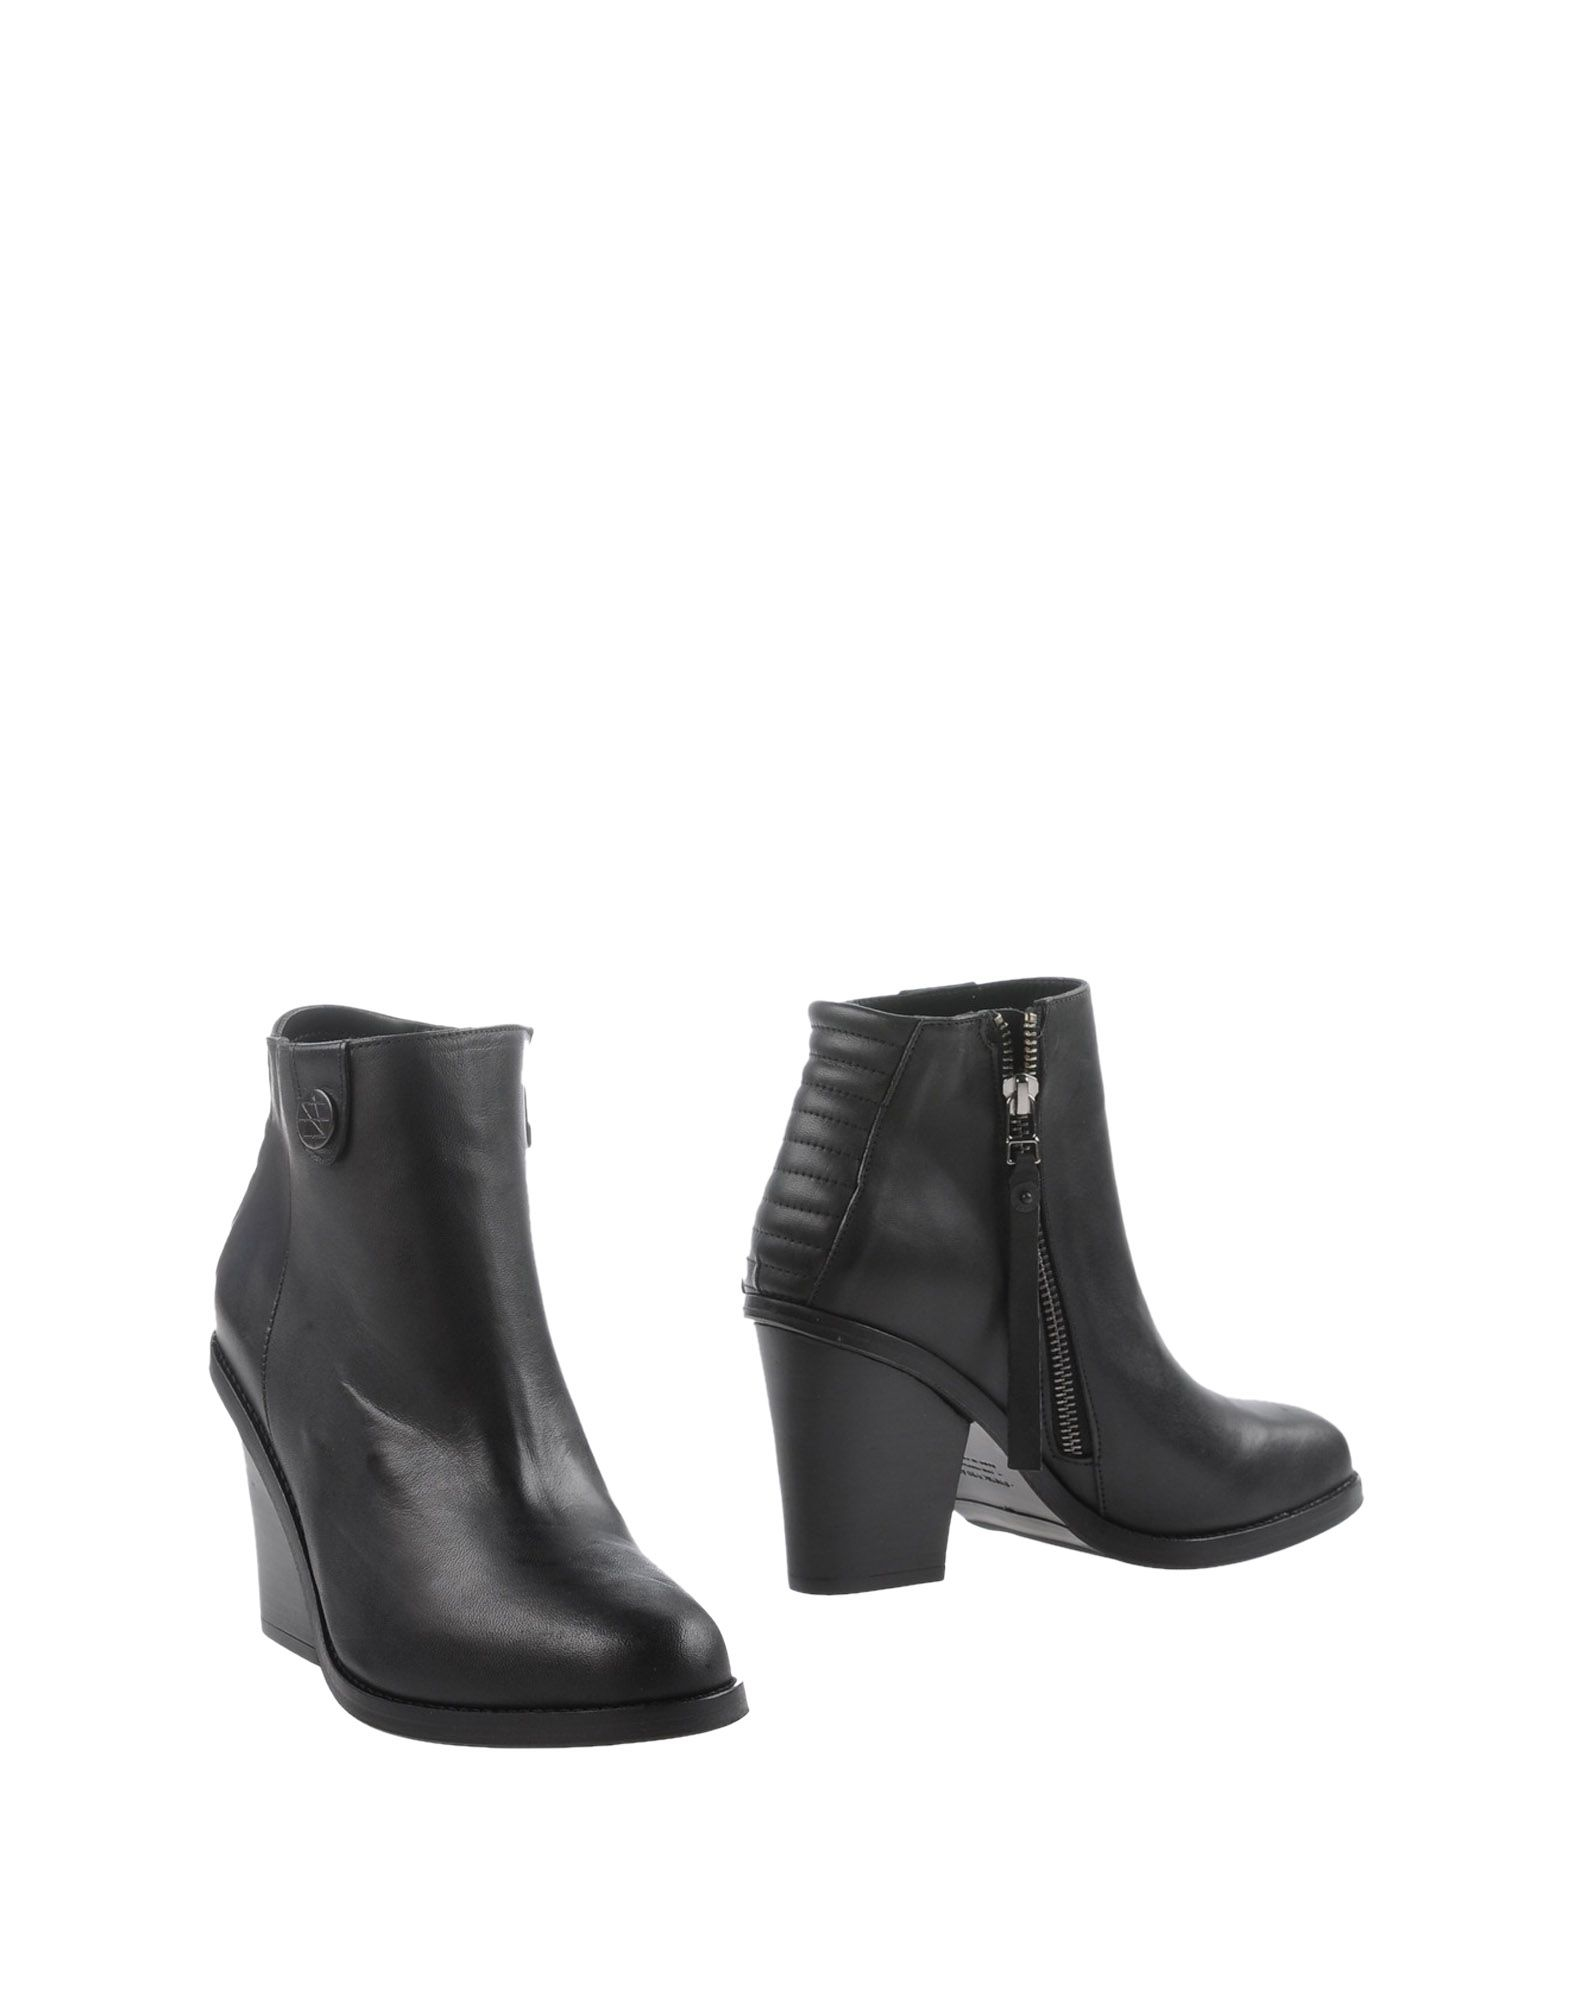 Lyst - Surface To Air Ankle Boots in Black